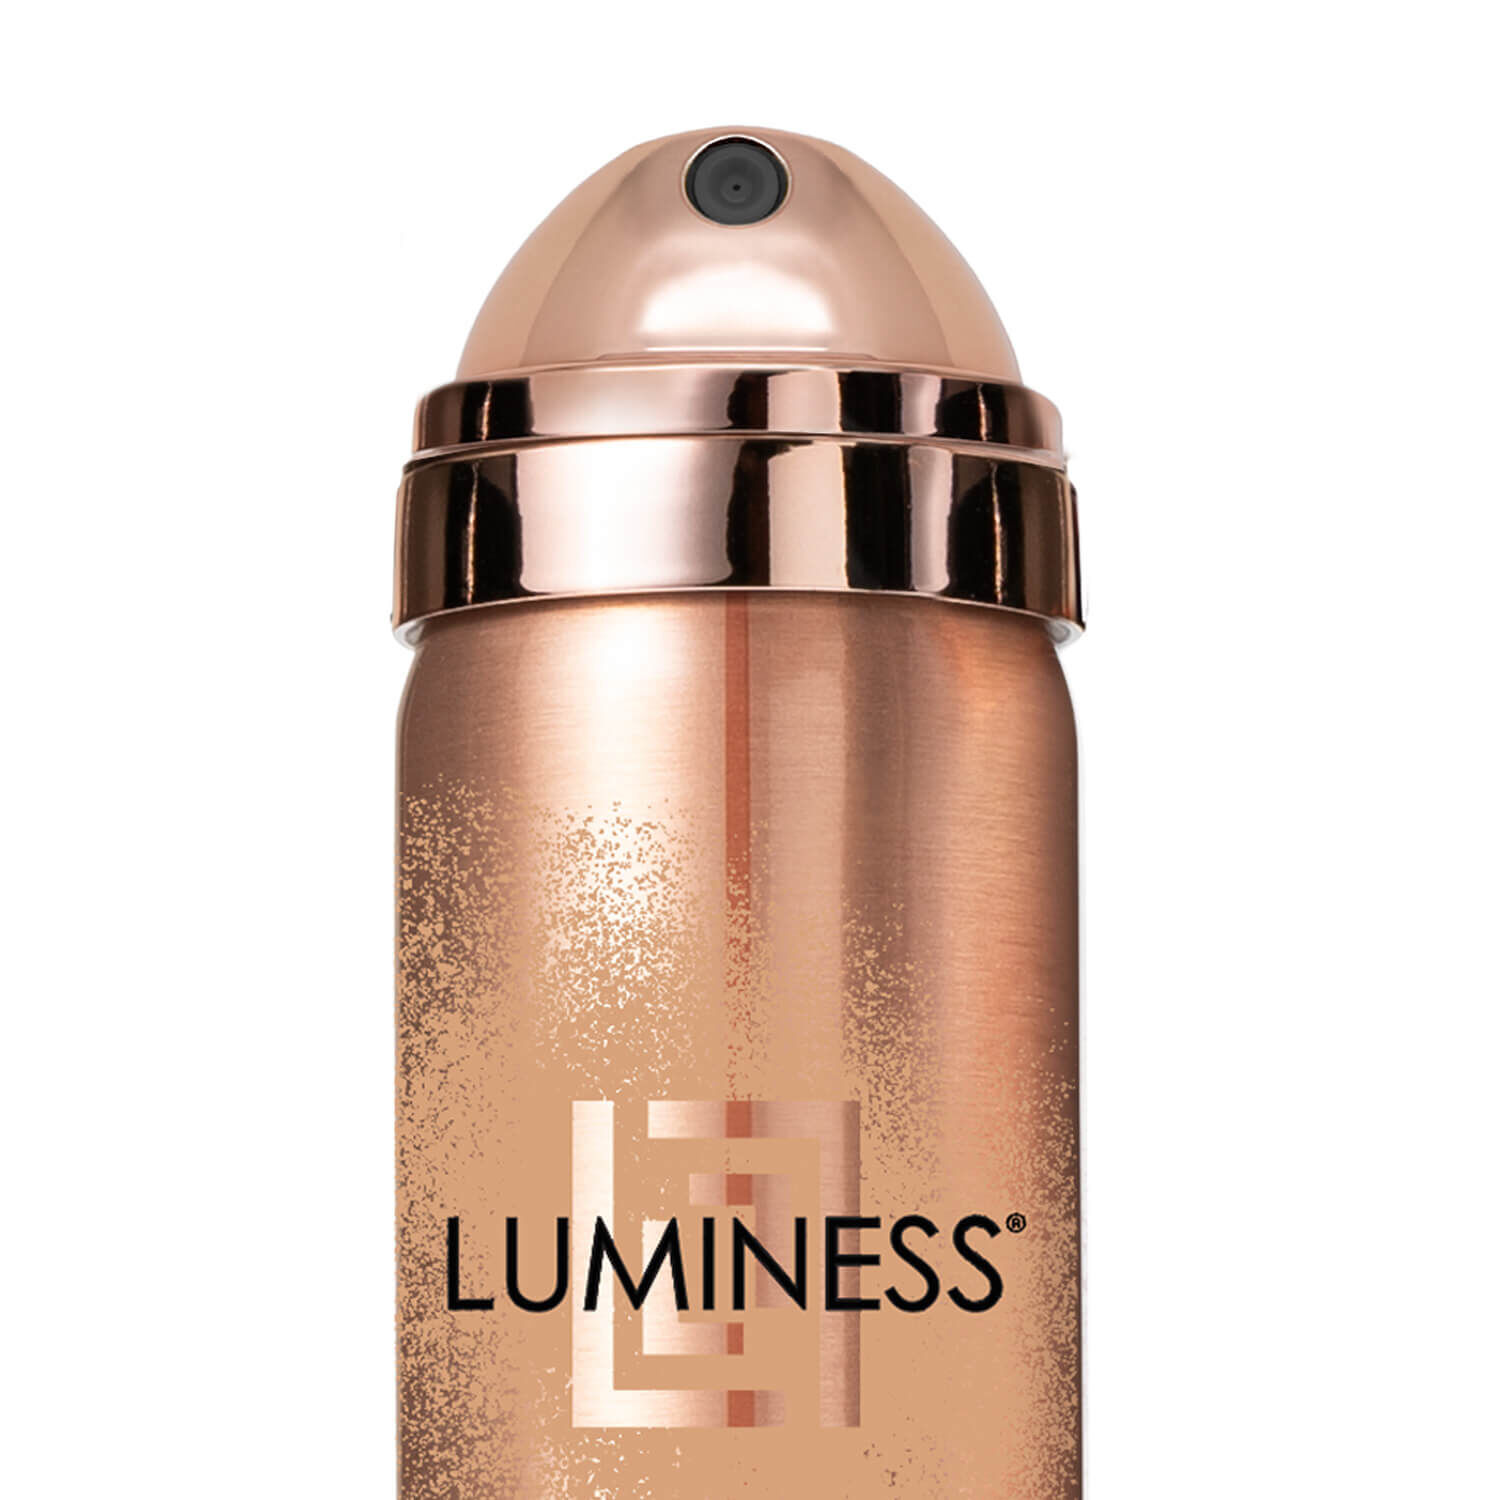 This foundation from @LUMINESS makes my skin look AIRBRUSHED! I love t, luminous spray makeup